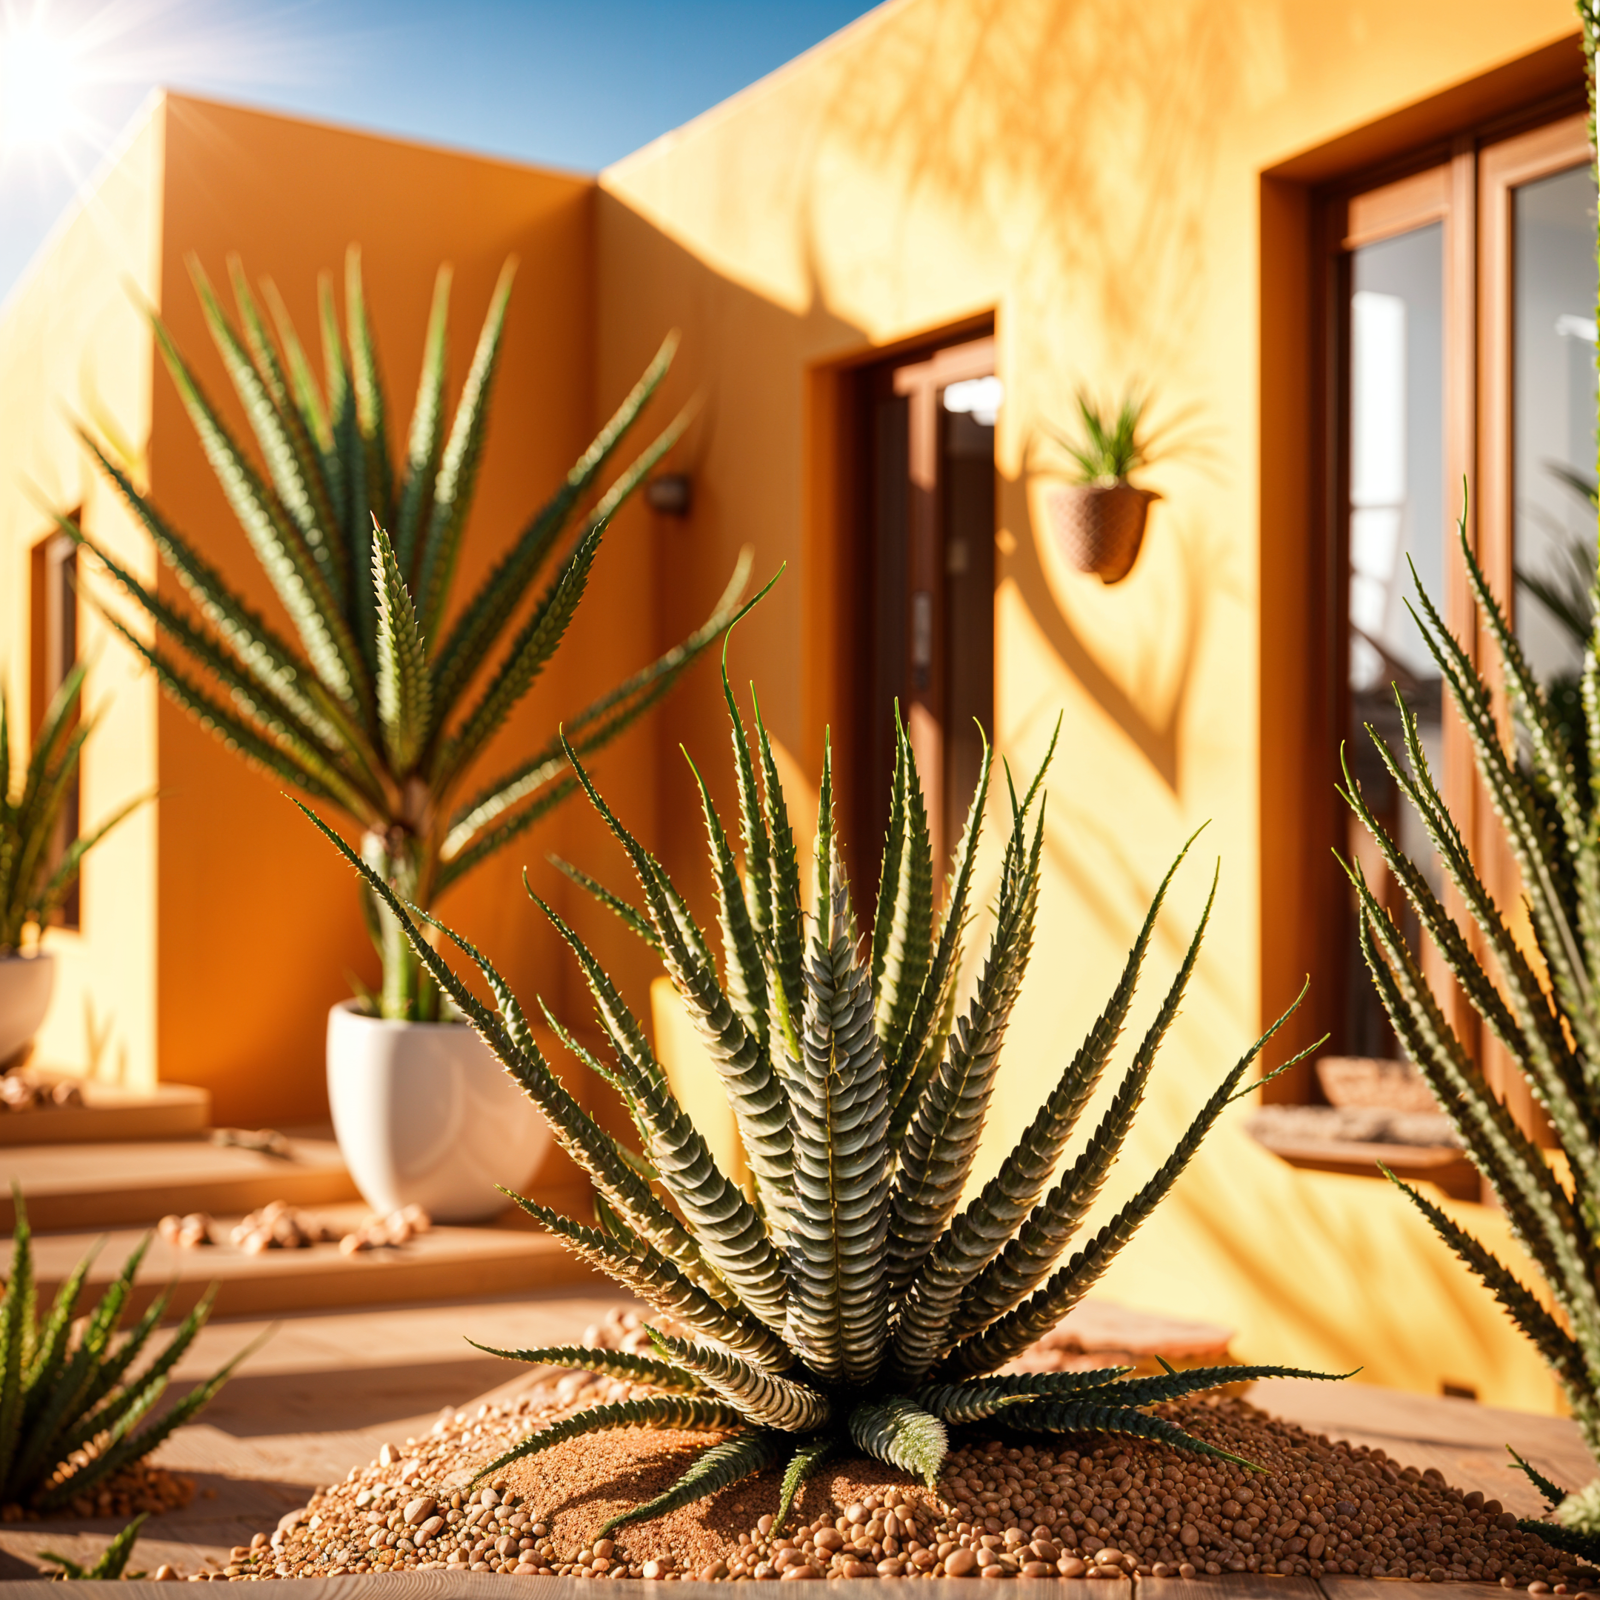 Haworthiopsis fasciata plant thriving in a sunny, desert garden with a Mexican-style house backdrop.